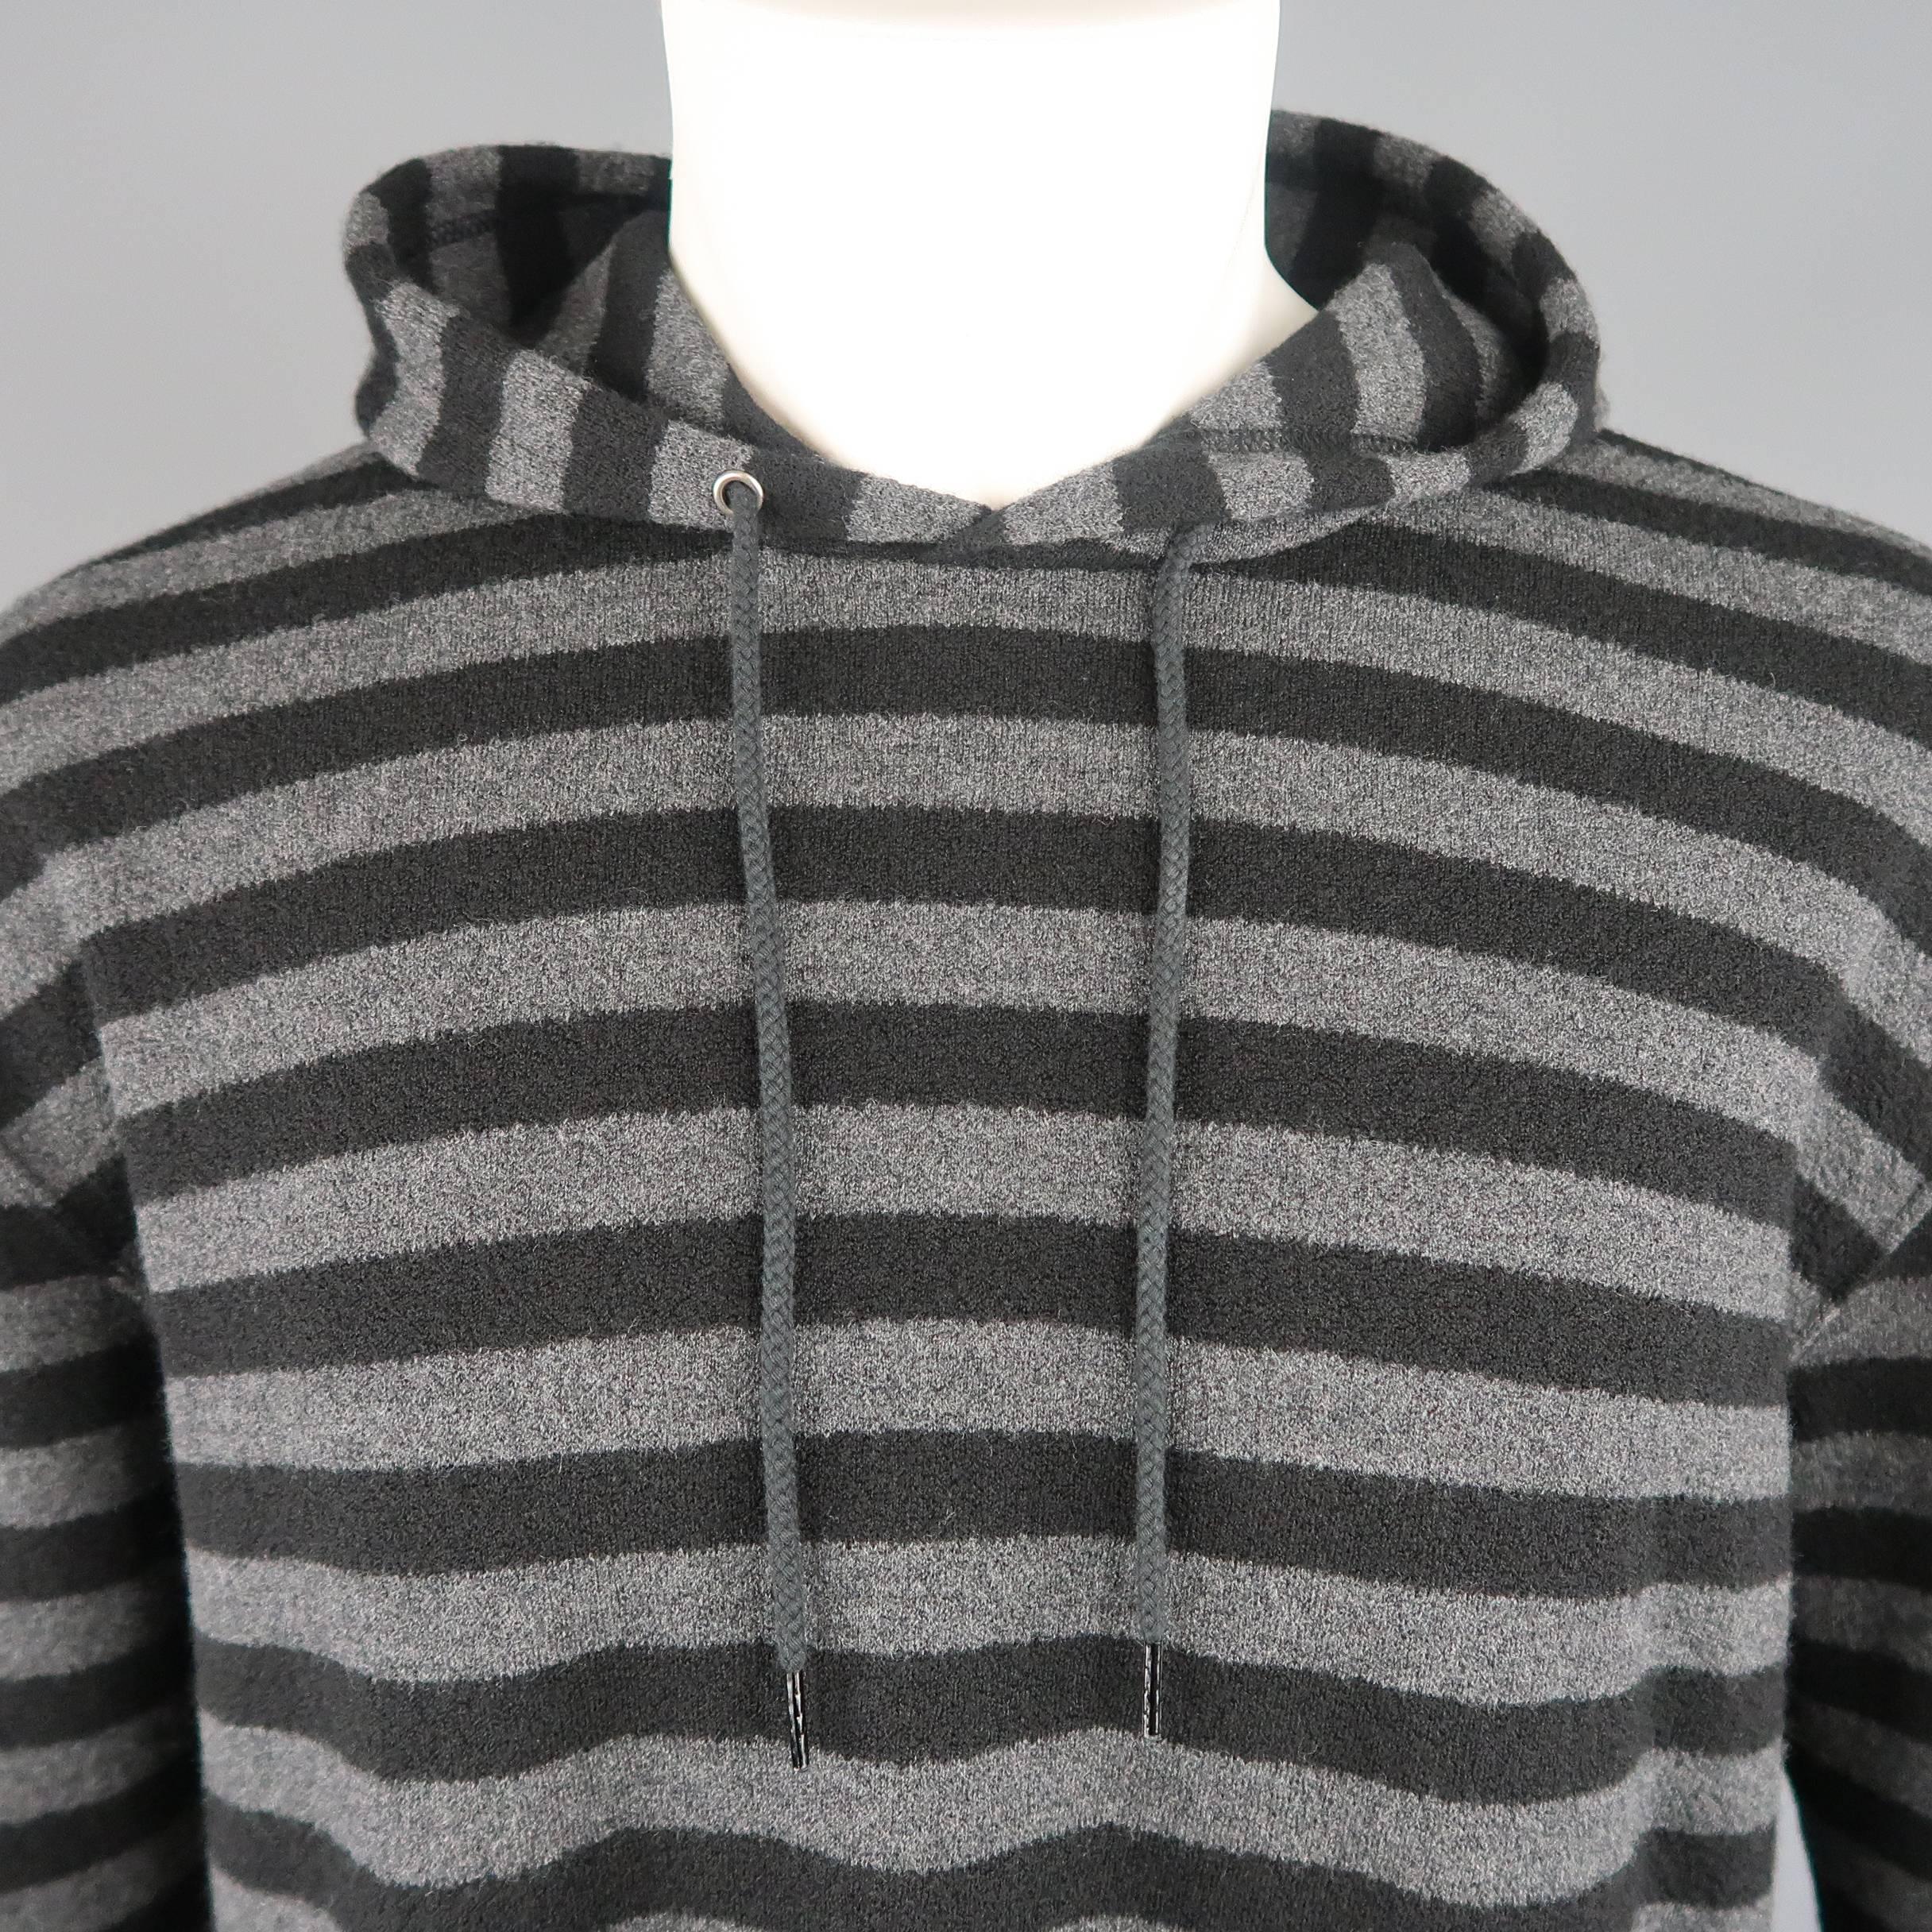 Junya Watanabe Man hoodie comes in black and gray striped wool textured knit with side pockets and drawstring hood. Made in Japan.
 
New with Tags.
Marked: S
 
Measurements:
 
Shoulder: 22 in.
Chest: 46 in.
Sleeve: 22 in.
Length: 30 in.
